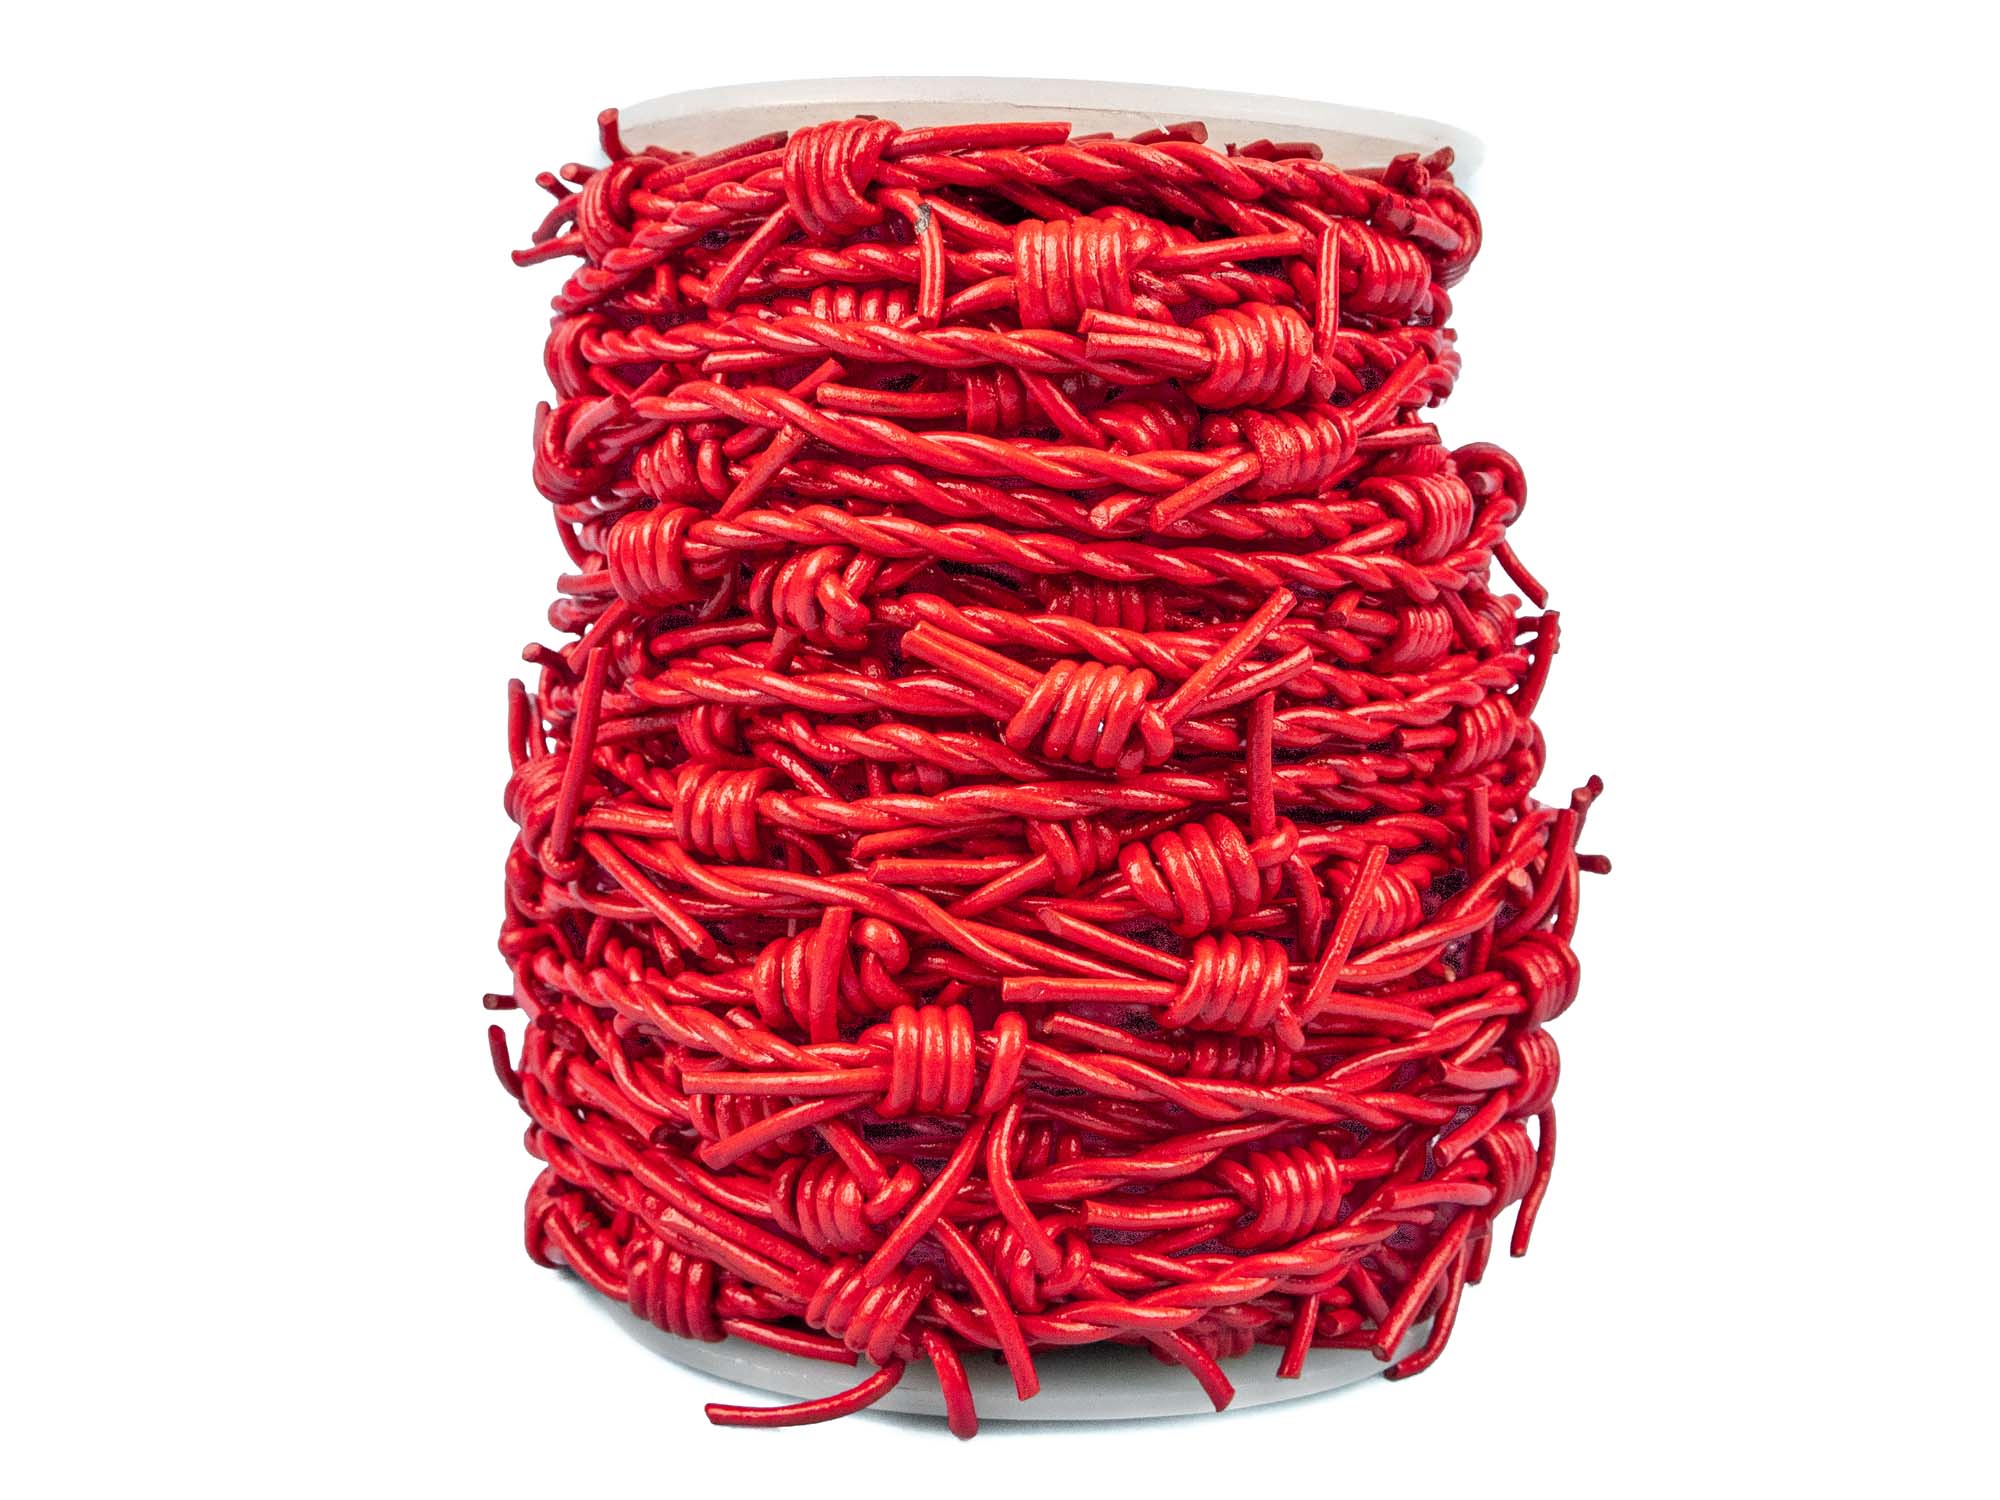 Round Barb Wire Cord 1.5mm x 25m: Red - 297-RW15x25-RD (9UC4I)